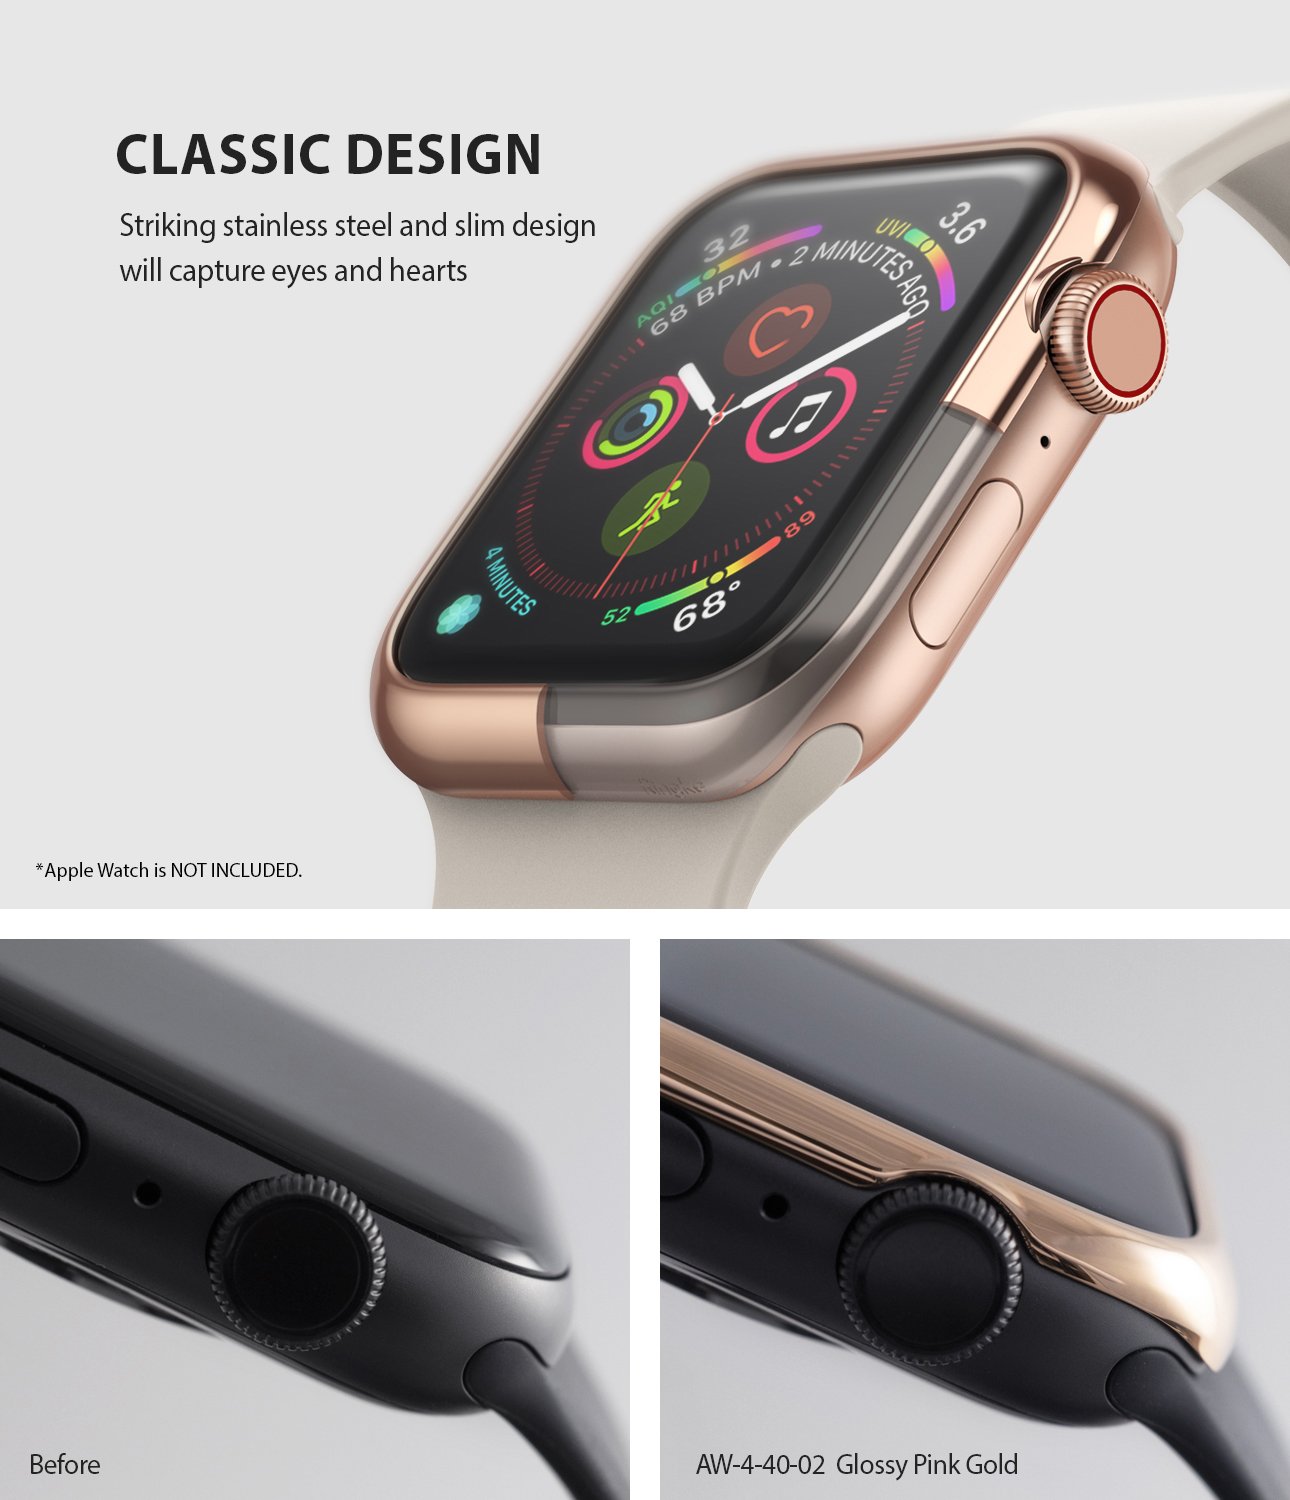 ringke bezel styling 40-02 rose gold stainless steel on apple watch series 6 / 5 / 4 / SE 40mm classic design